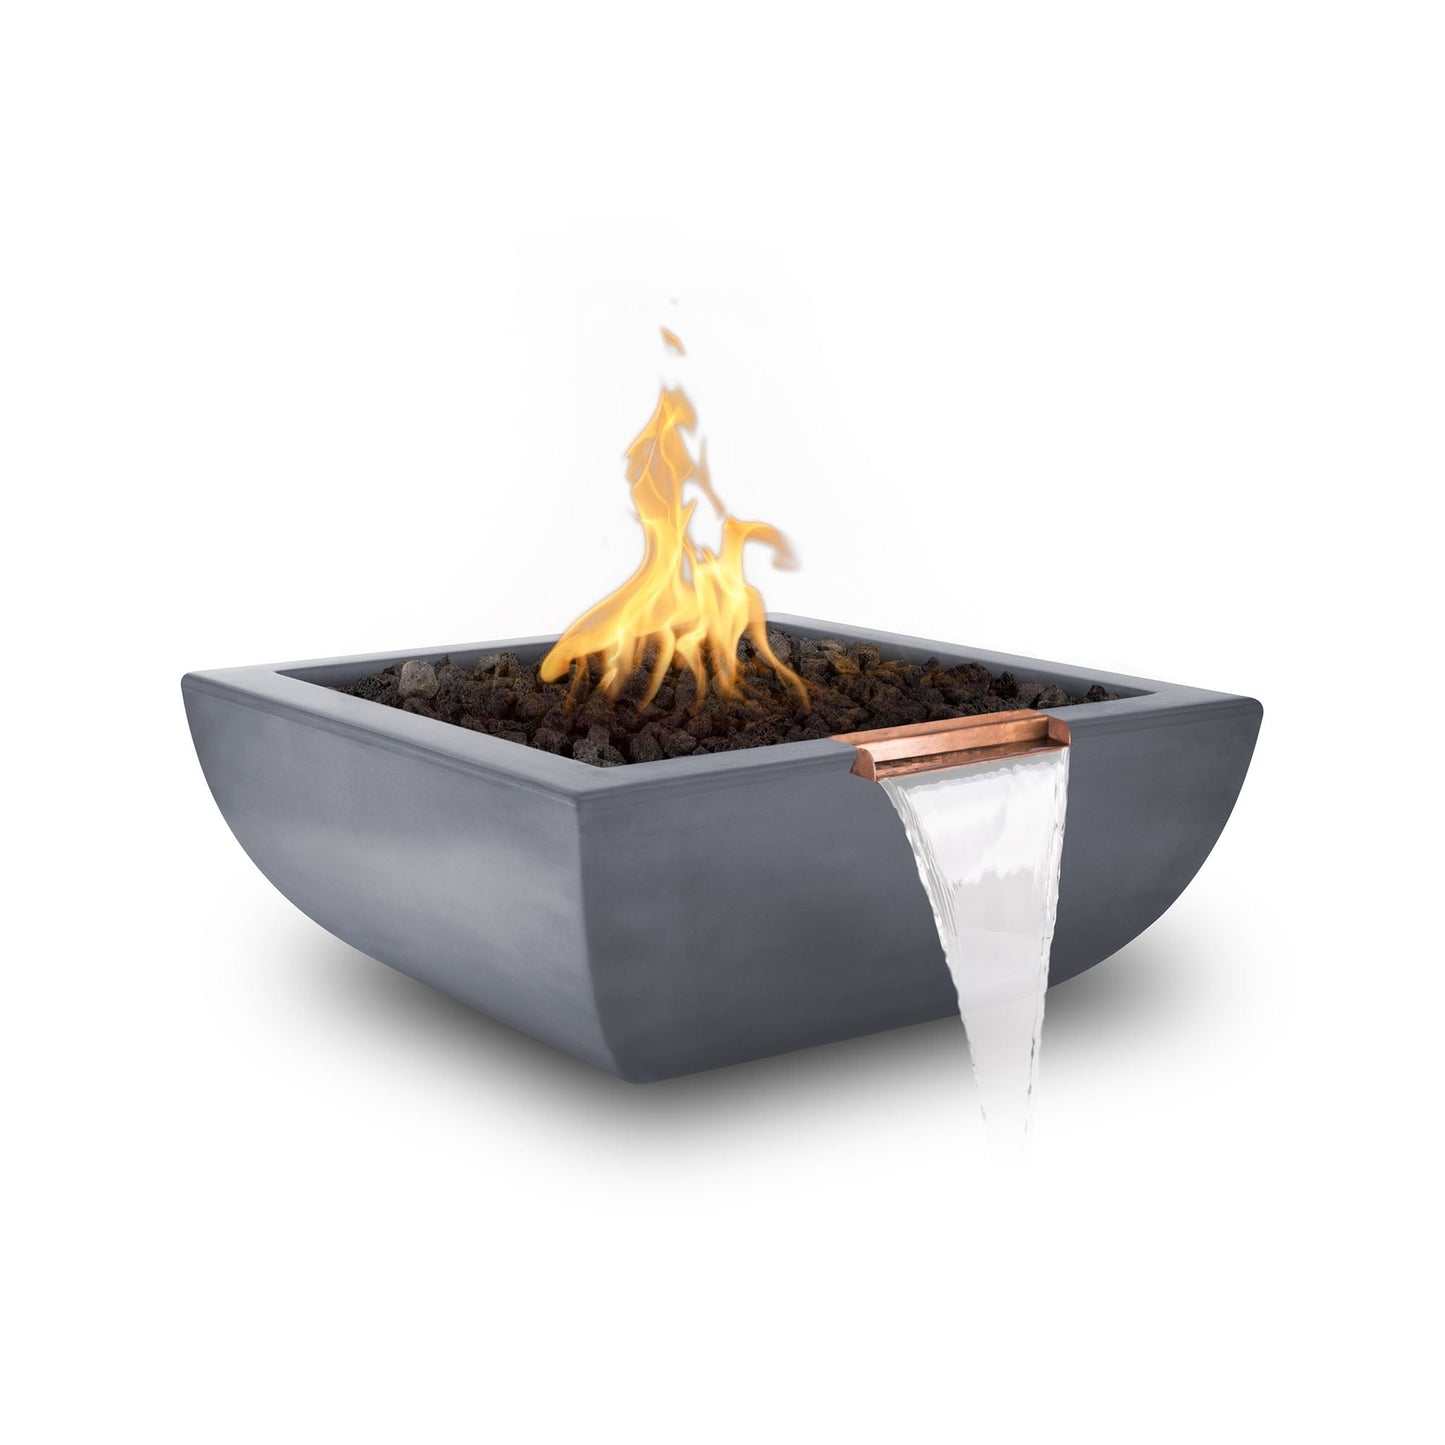 The Outdoor Plus Square Avalon 30" Black GFRC Concrete Liquid Propane Fire & Water Bowl with Match Lit with Flame Sense Ignition